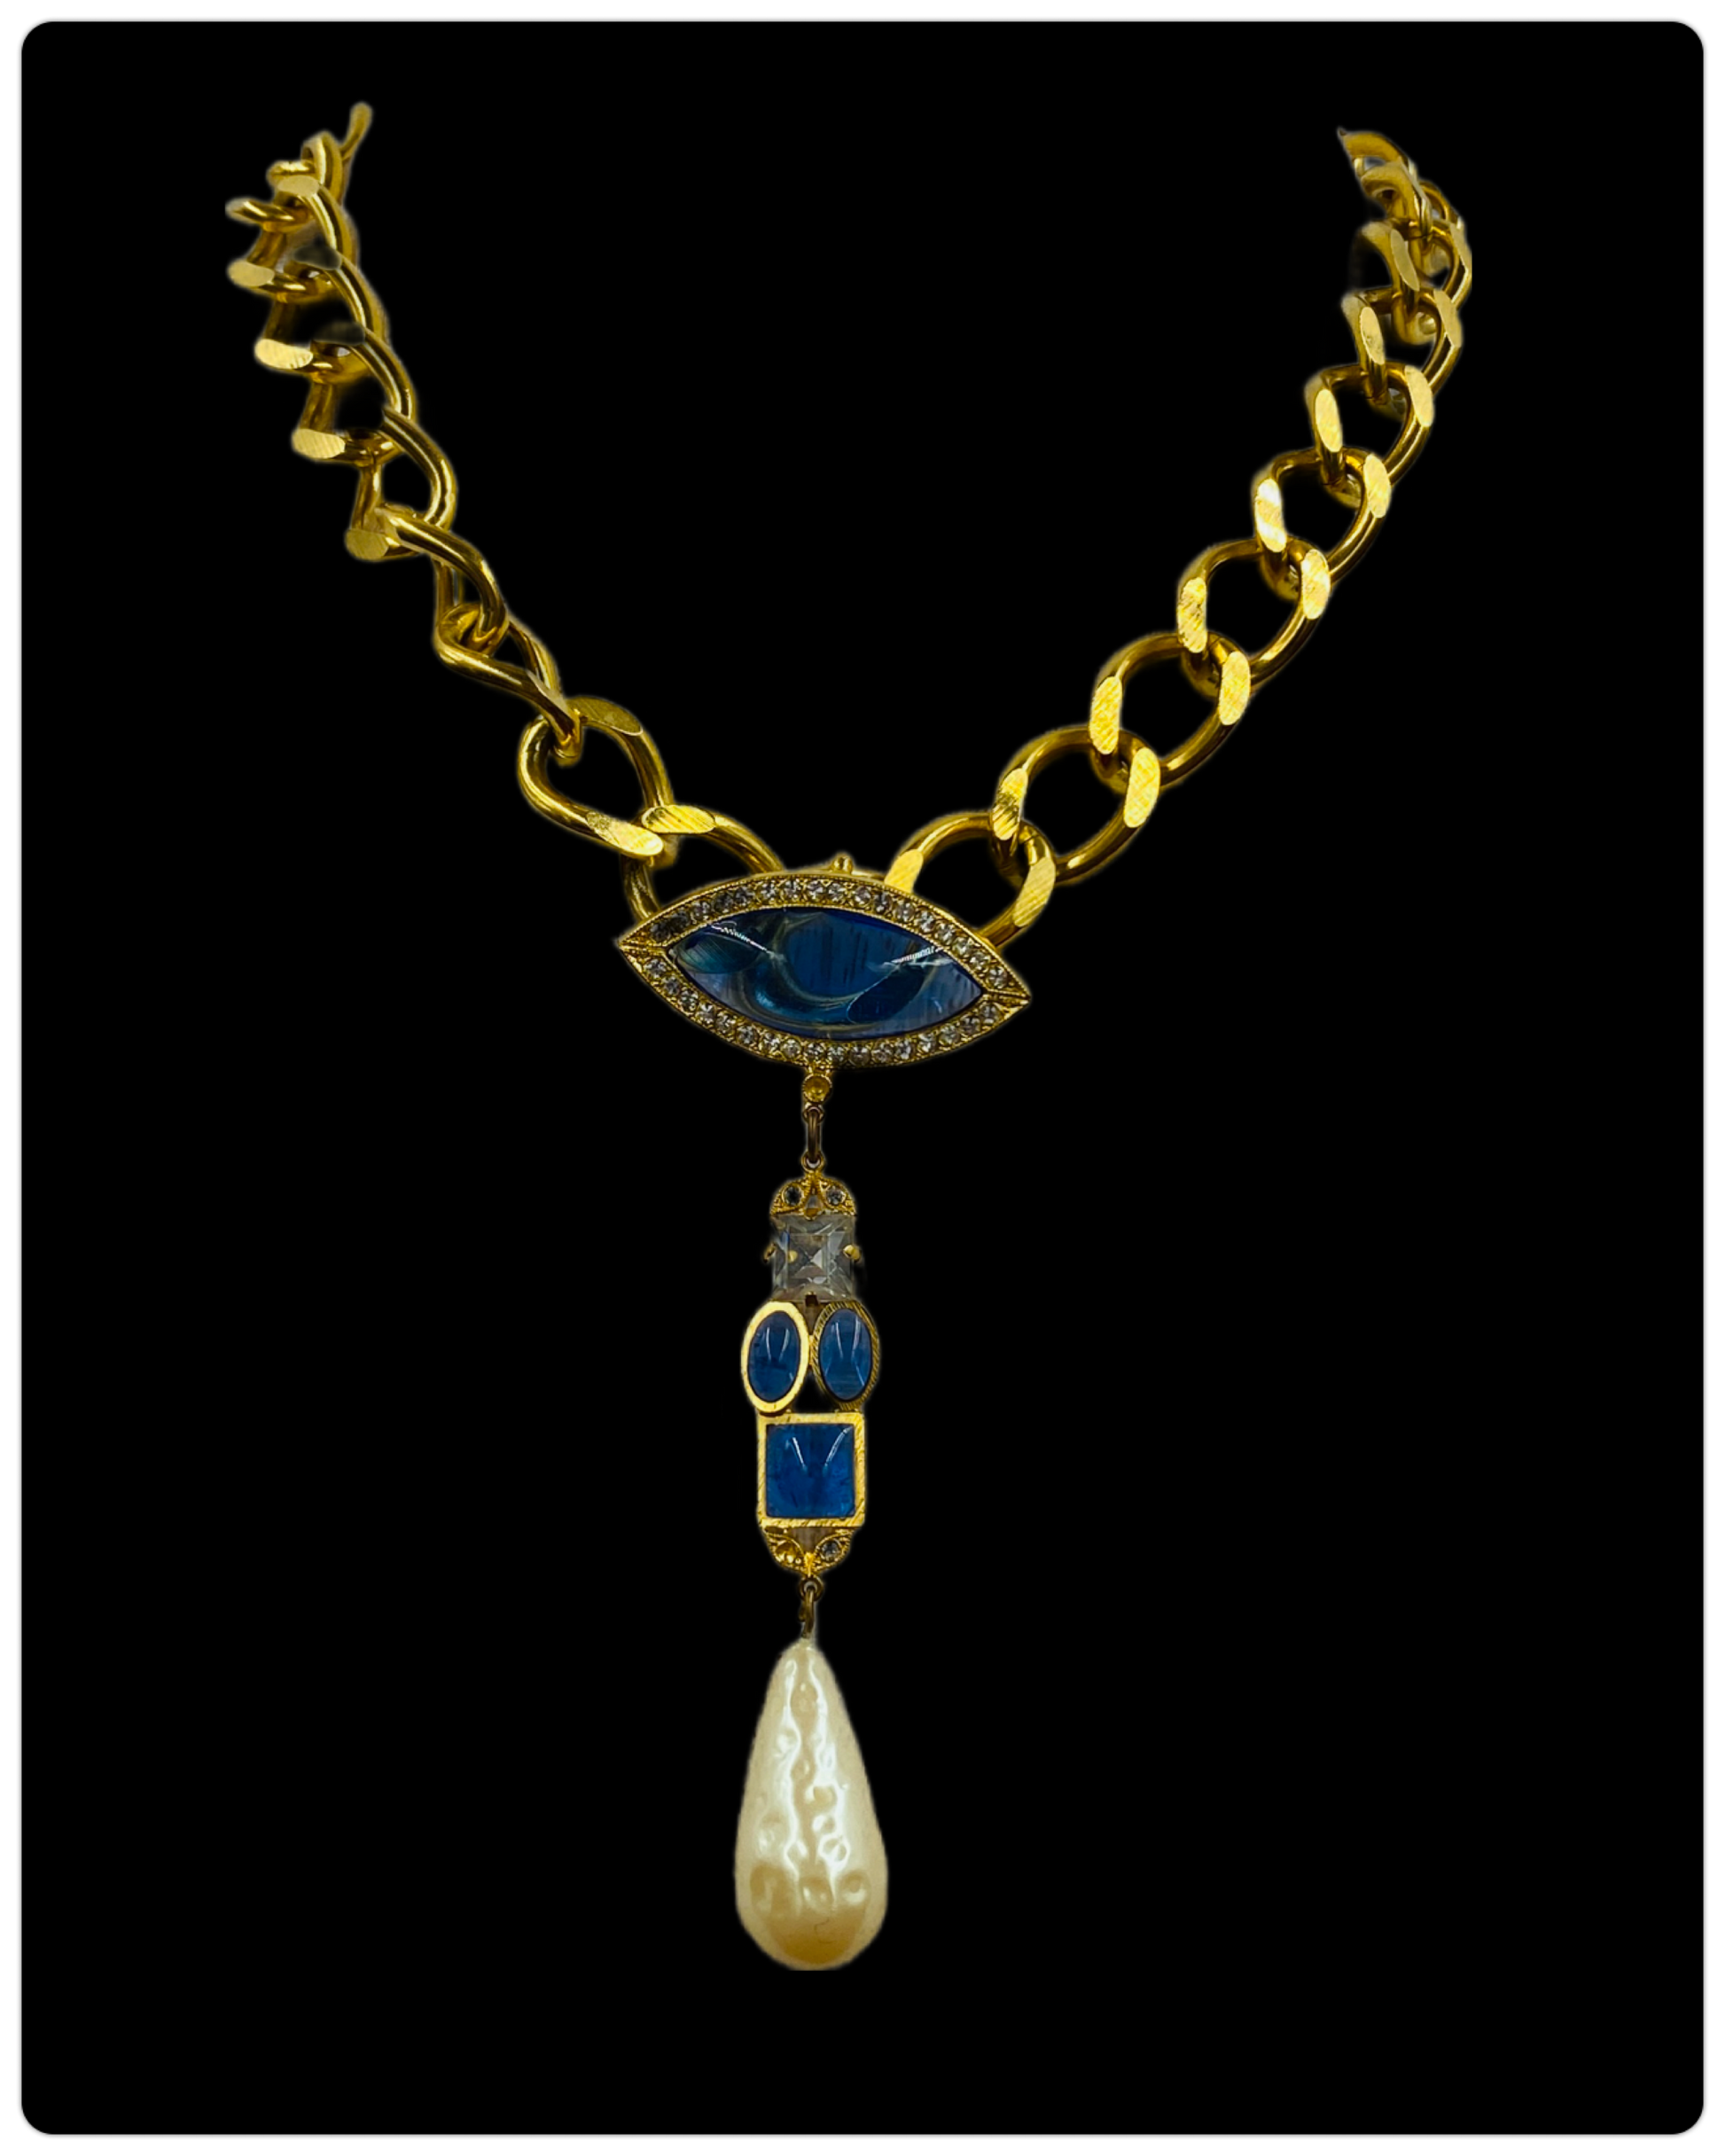 Vintage Butler & Wilson Goldtone Chunky Chain Necklace with Pearldrop & Blue Crystals